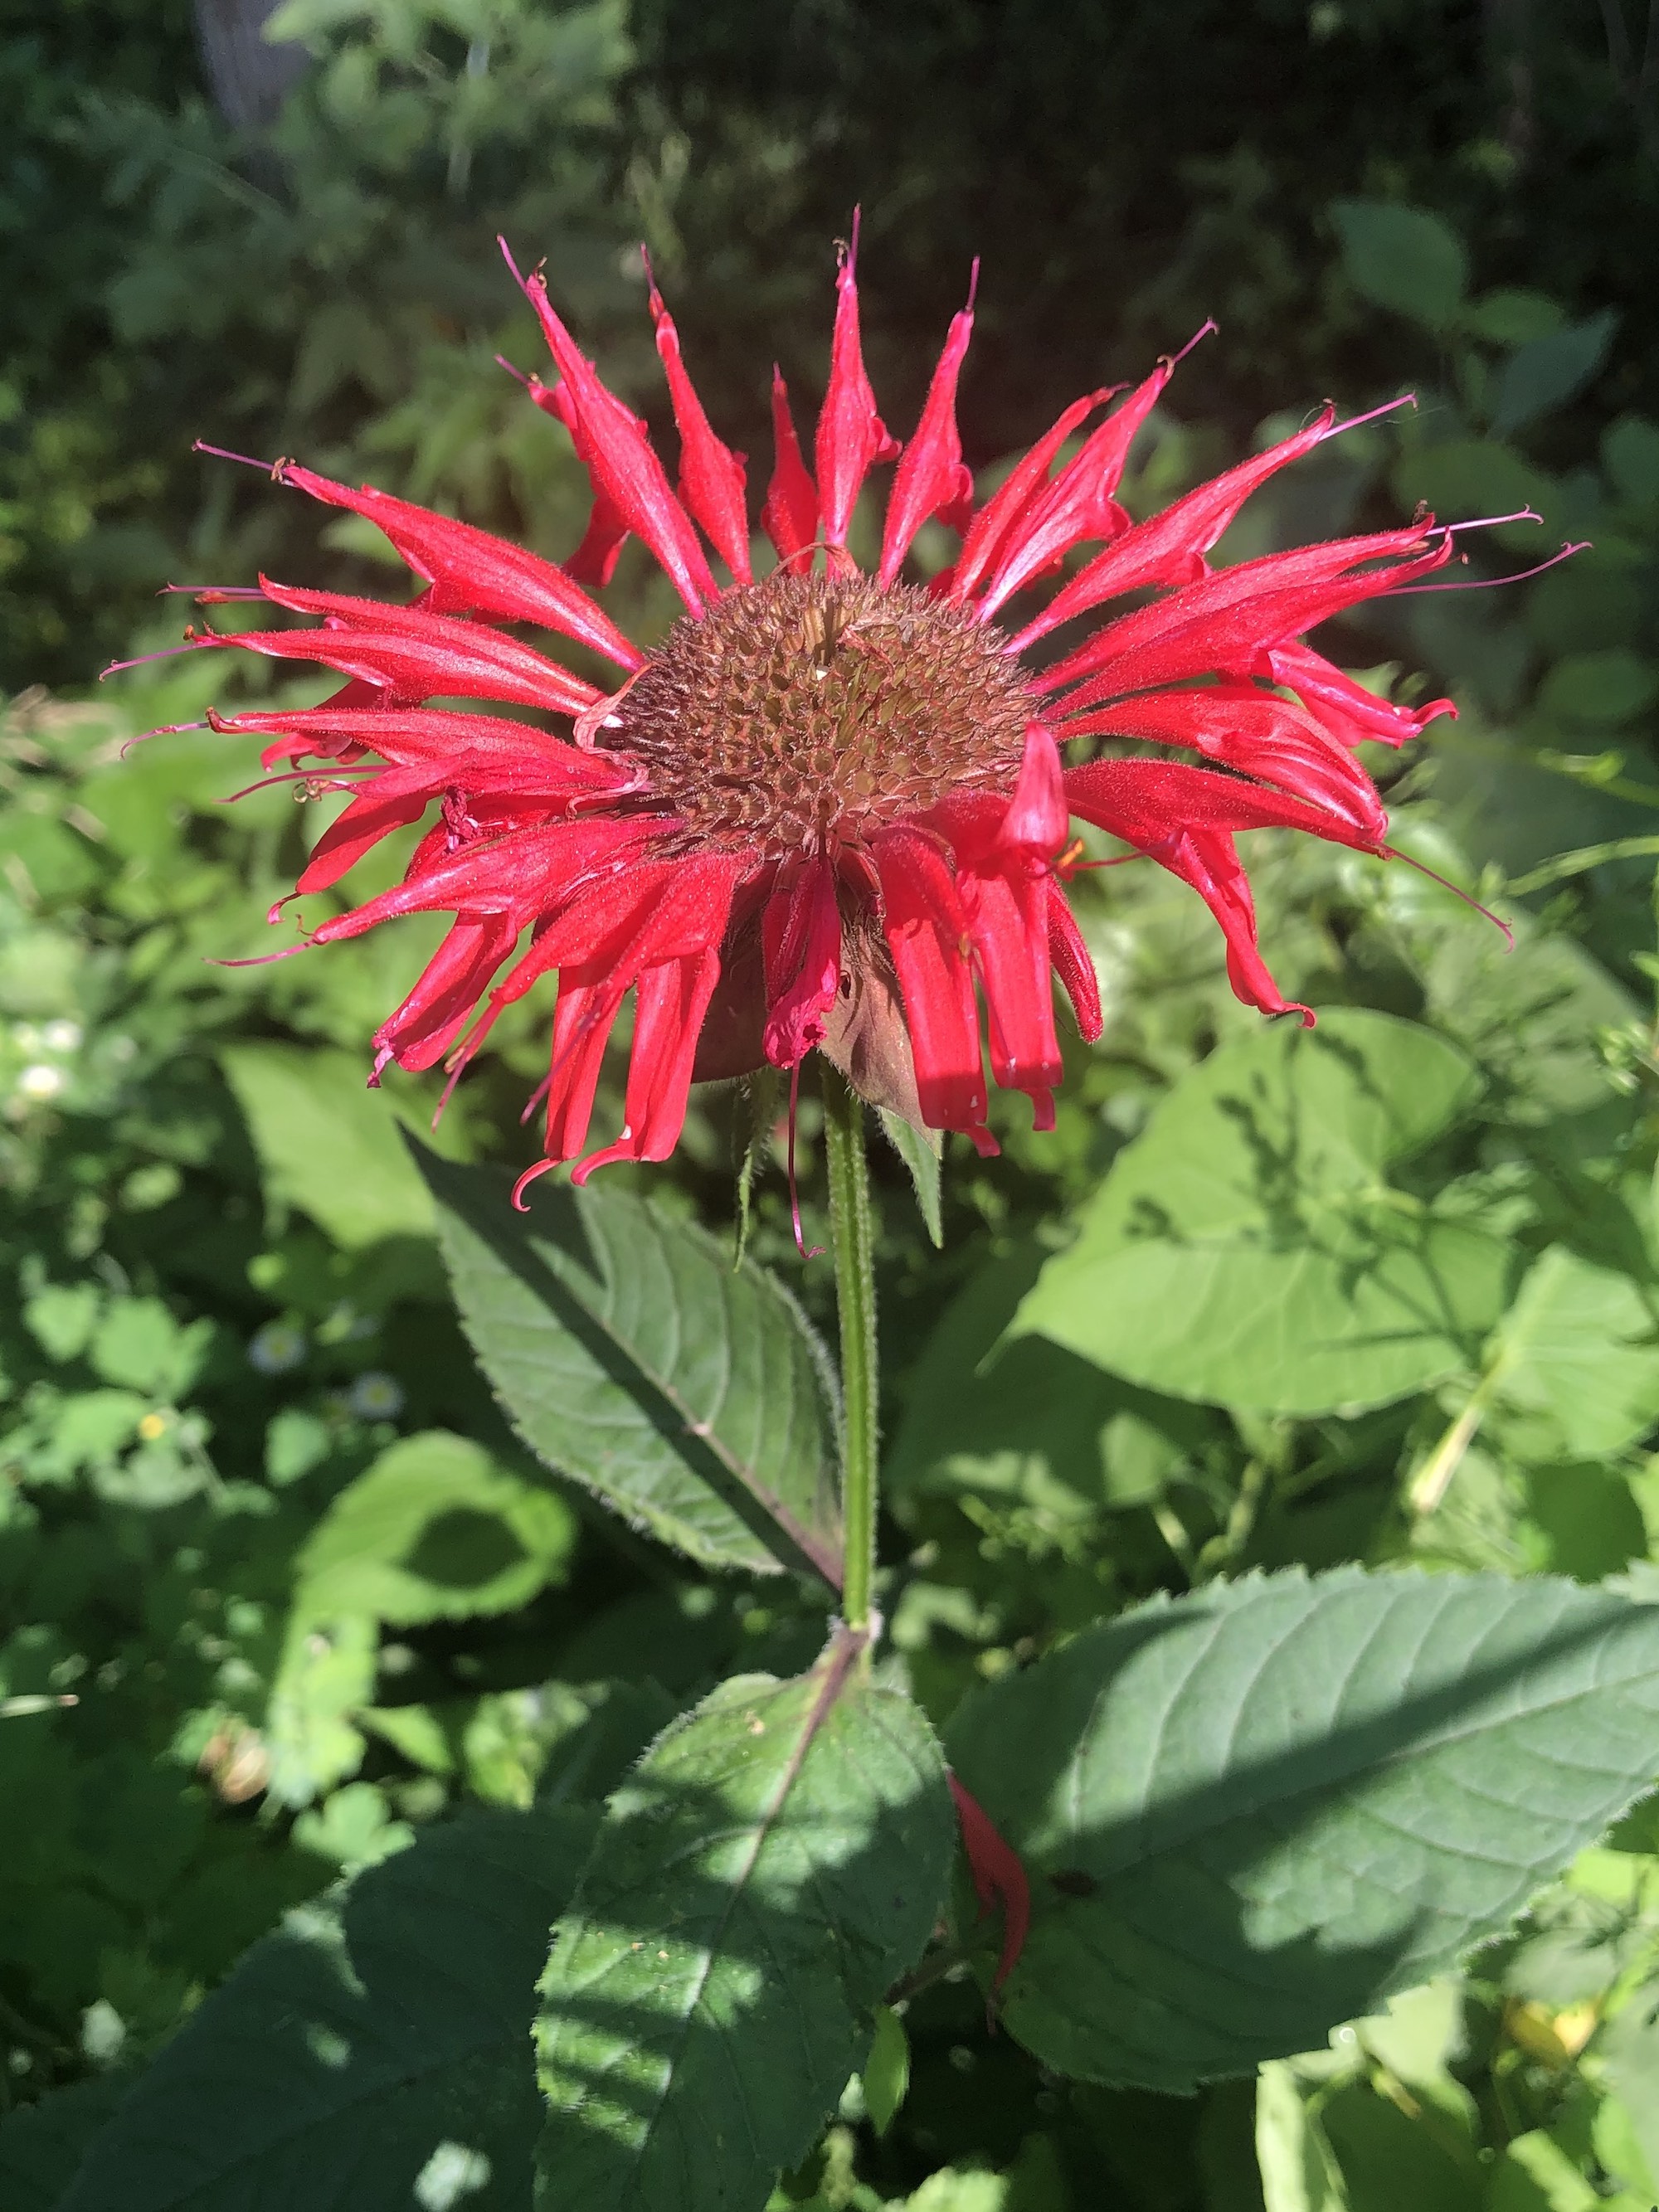 Beebalm along bike path behind Gregory Street in Madison, Wisconsin on July 16, 2021.